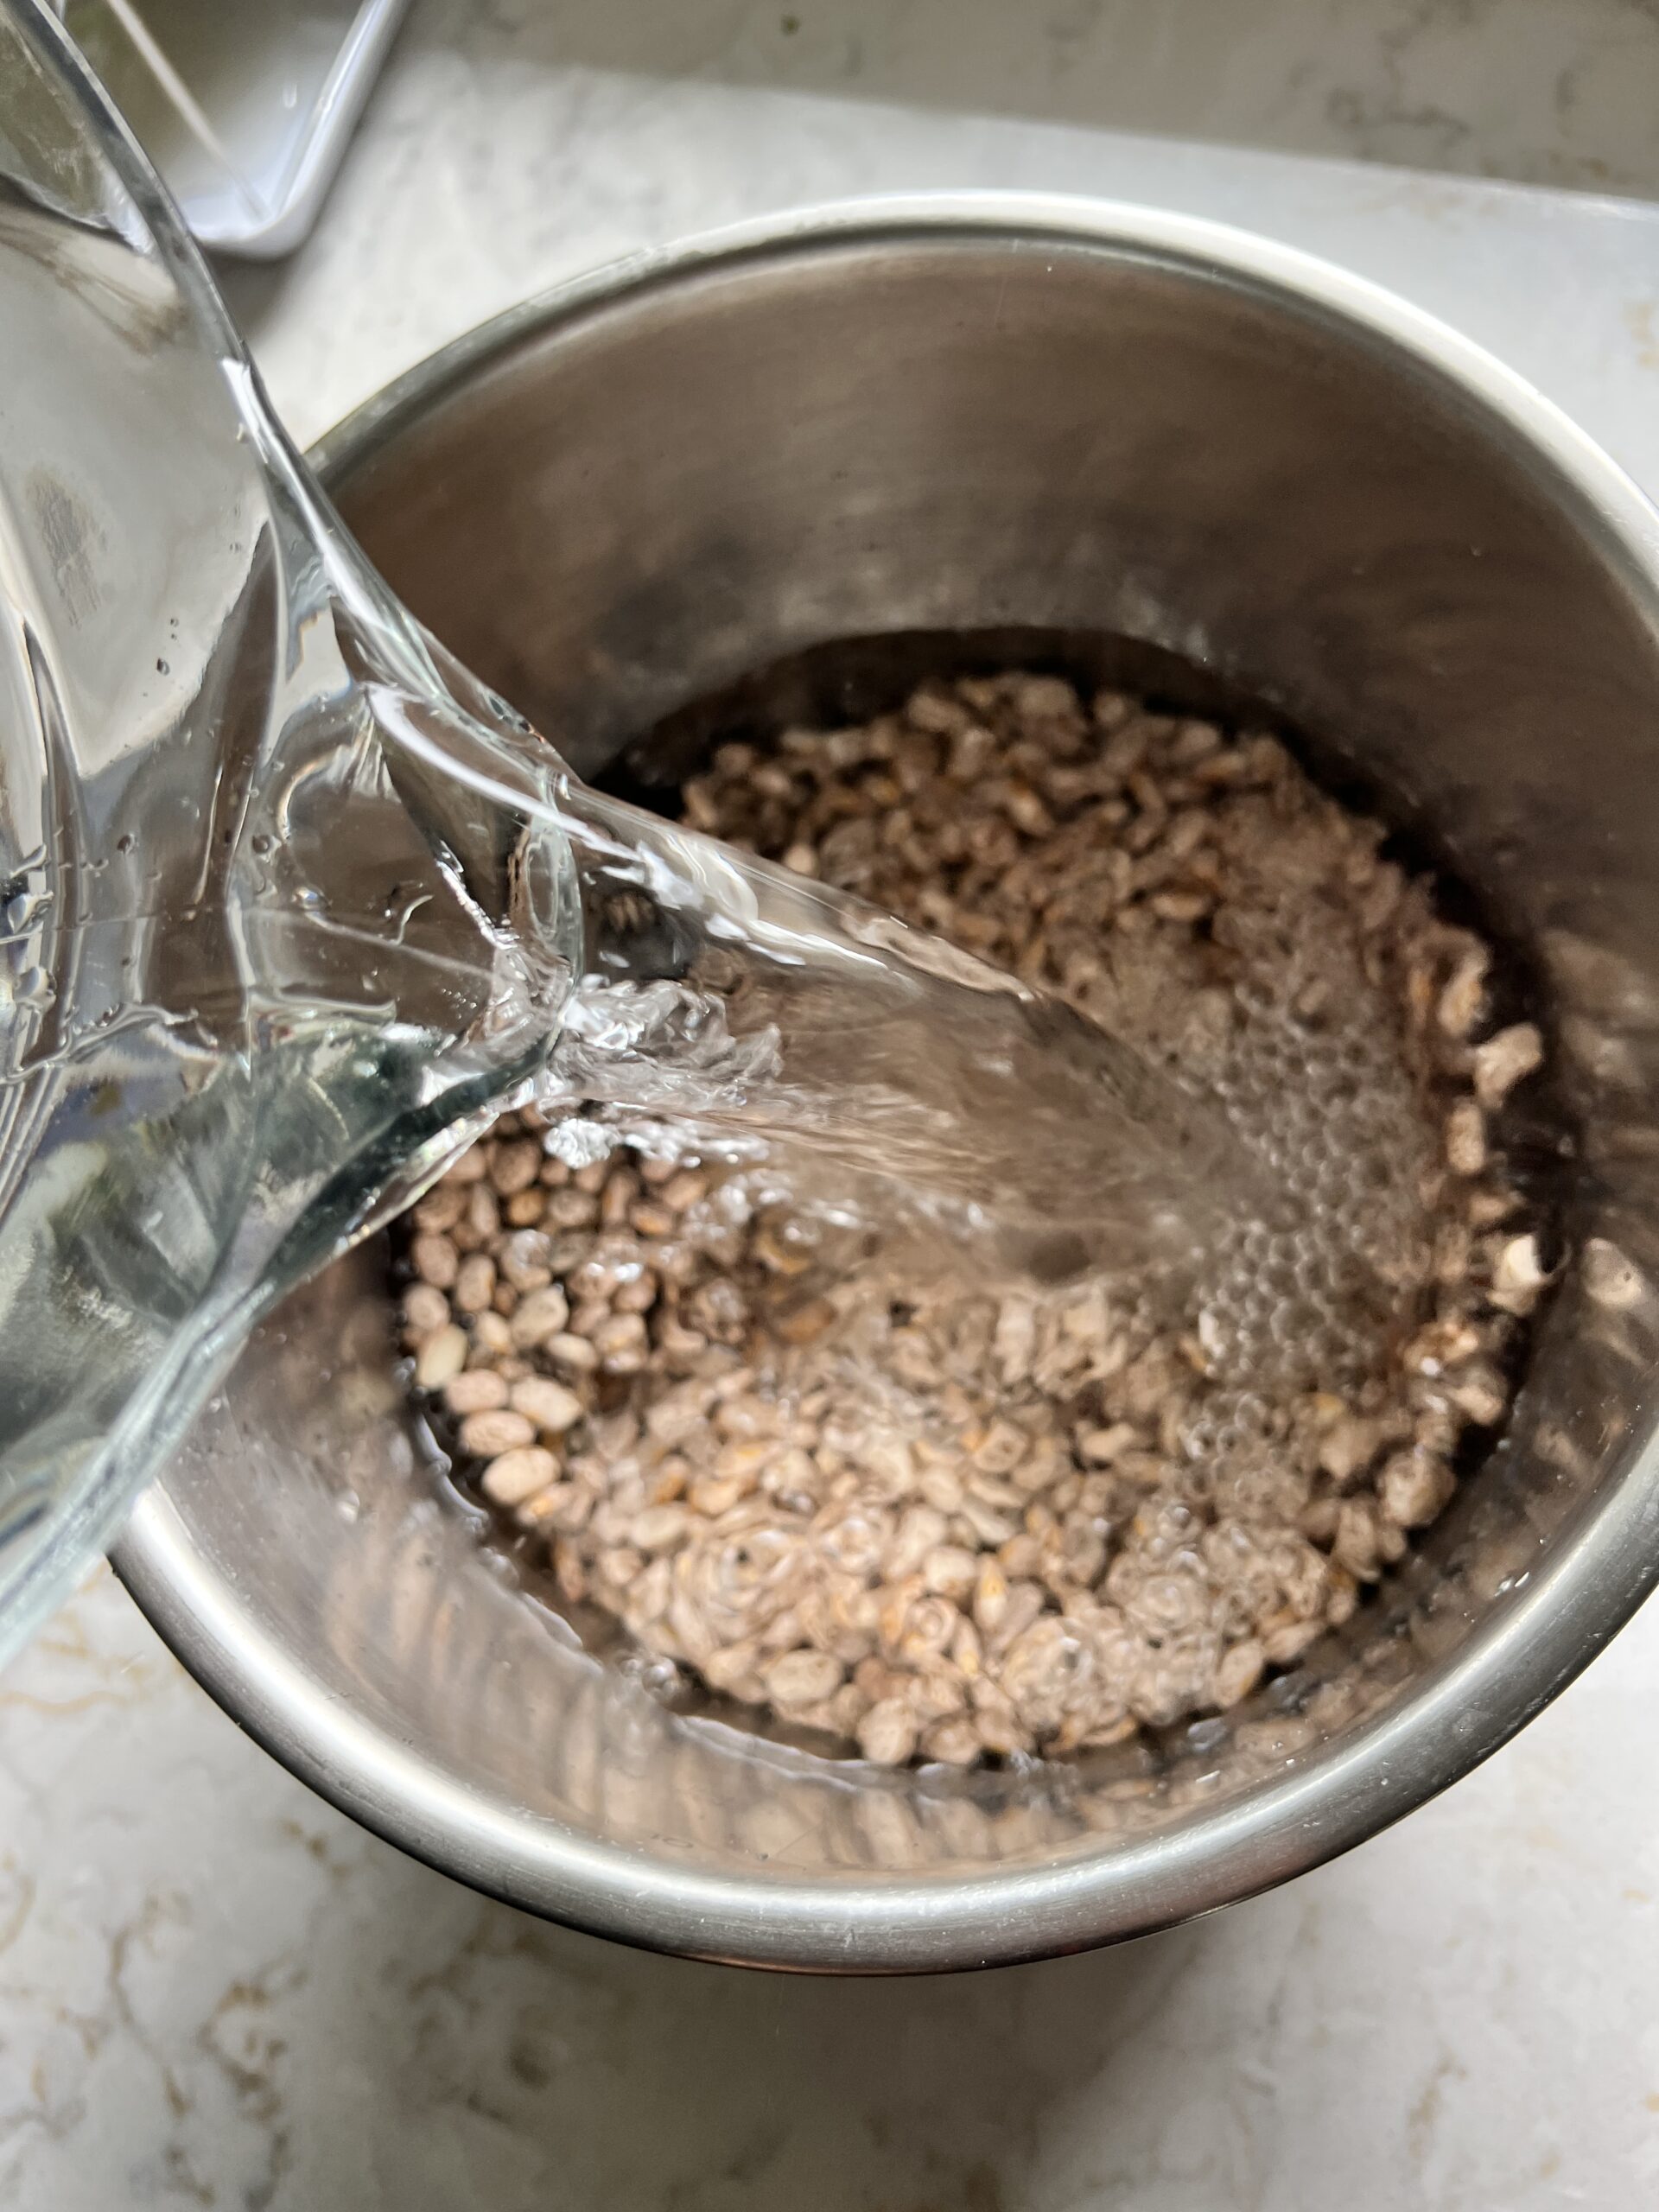 Process shot of adding water to pinto beans in an Instant Pot bowl